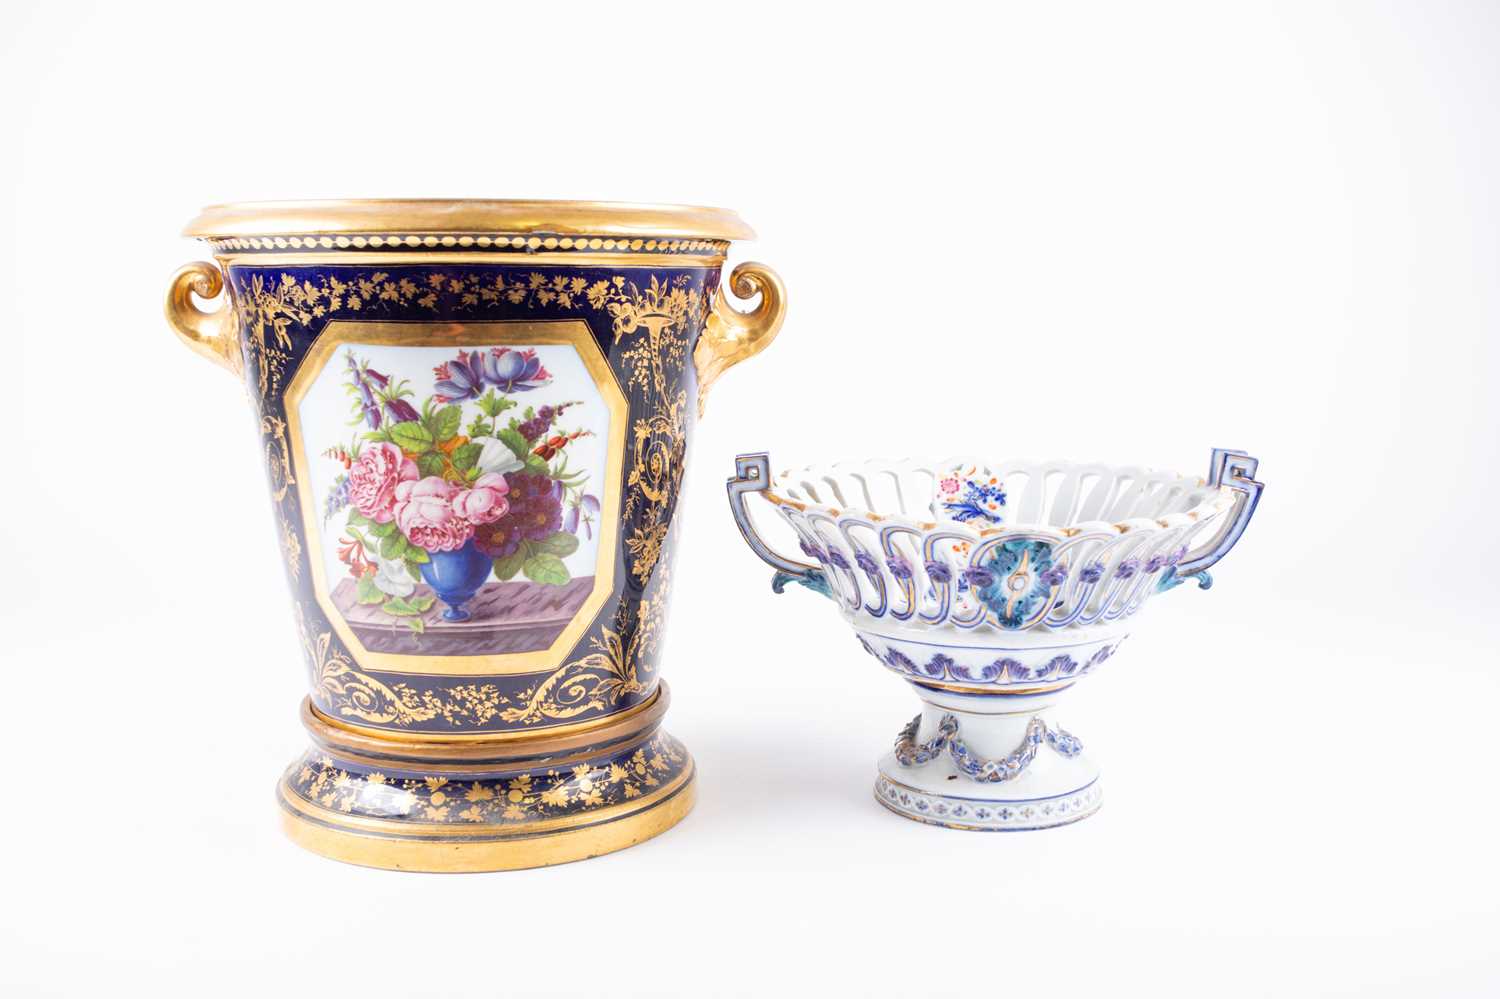 A 19th century porcelain blue and gilt vase, possibley Derby, with painted panels flowers and a